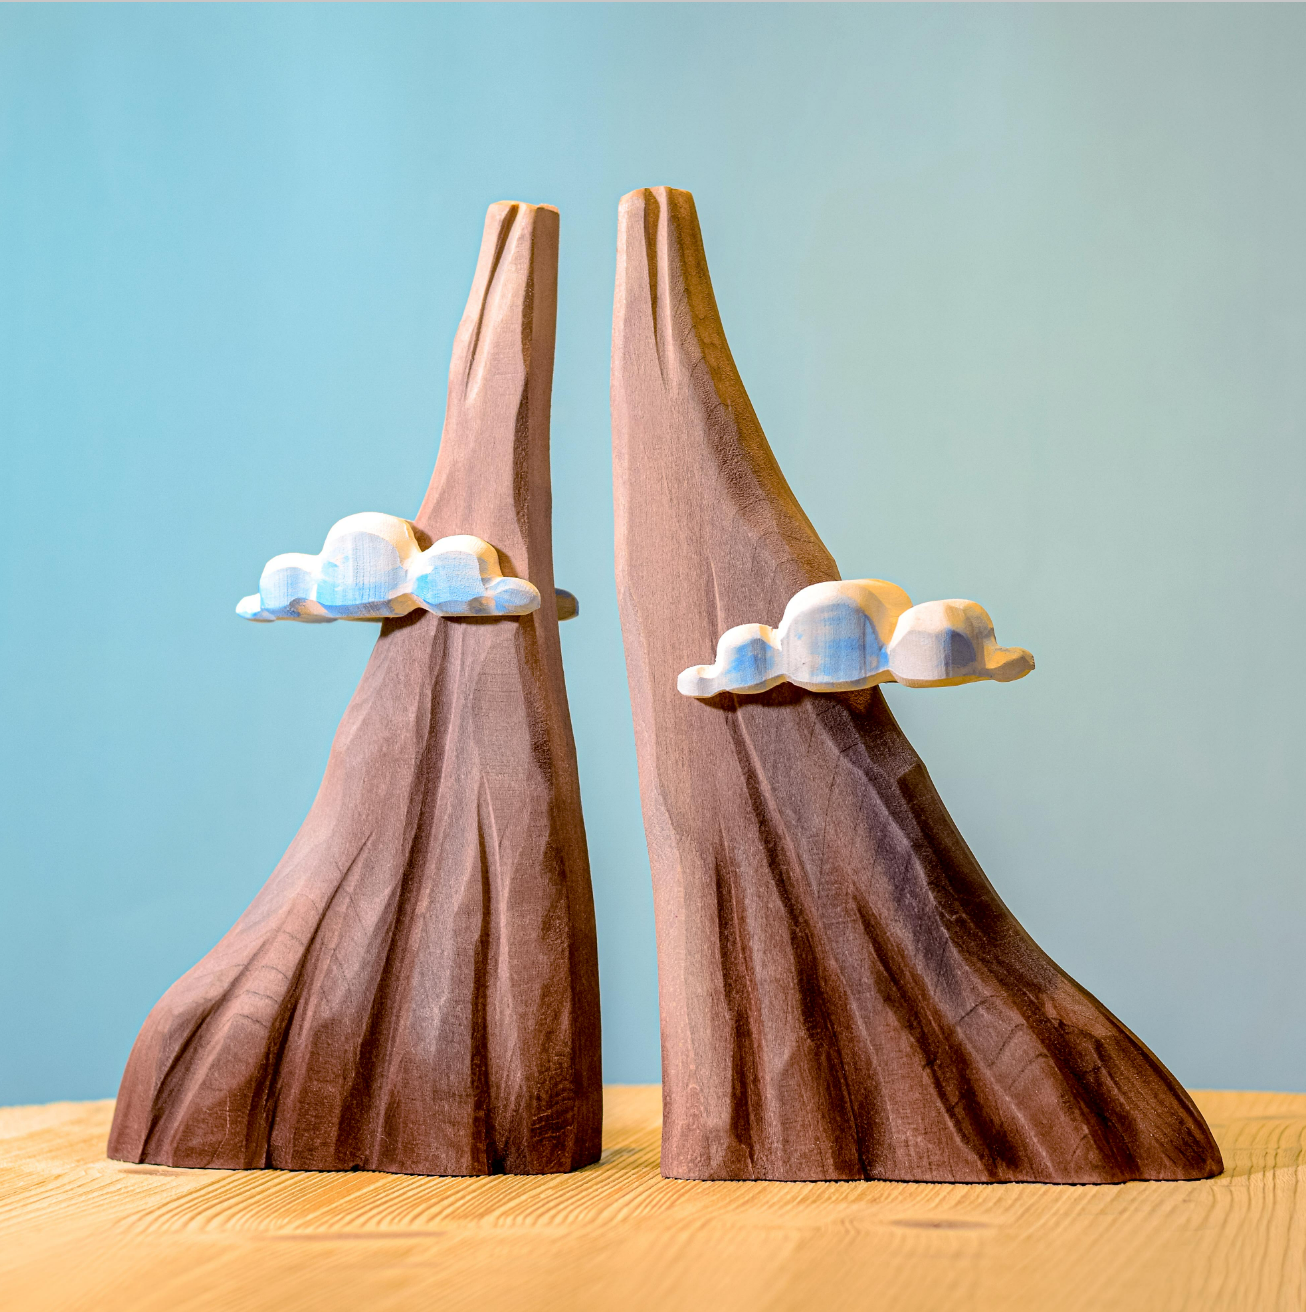 Bumbu Toys Wooden Volcano, Clouds & Lava